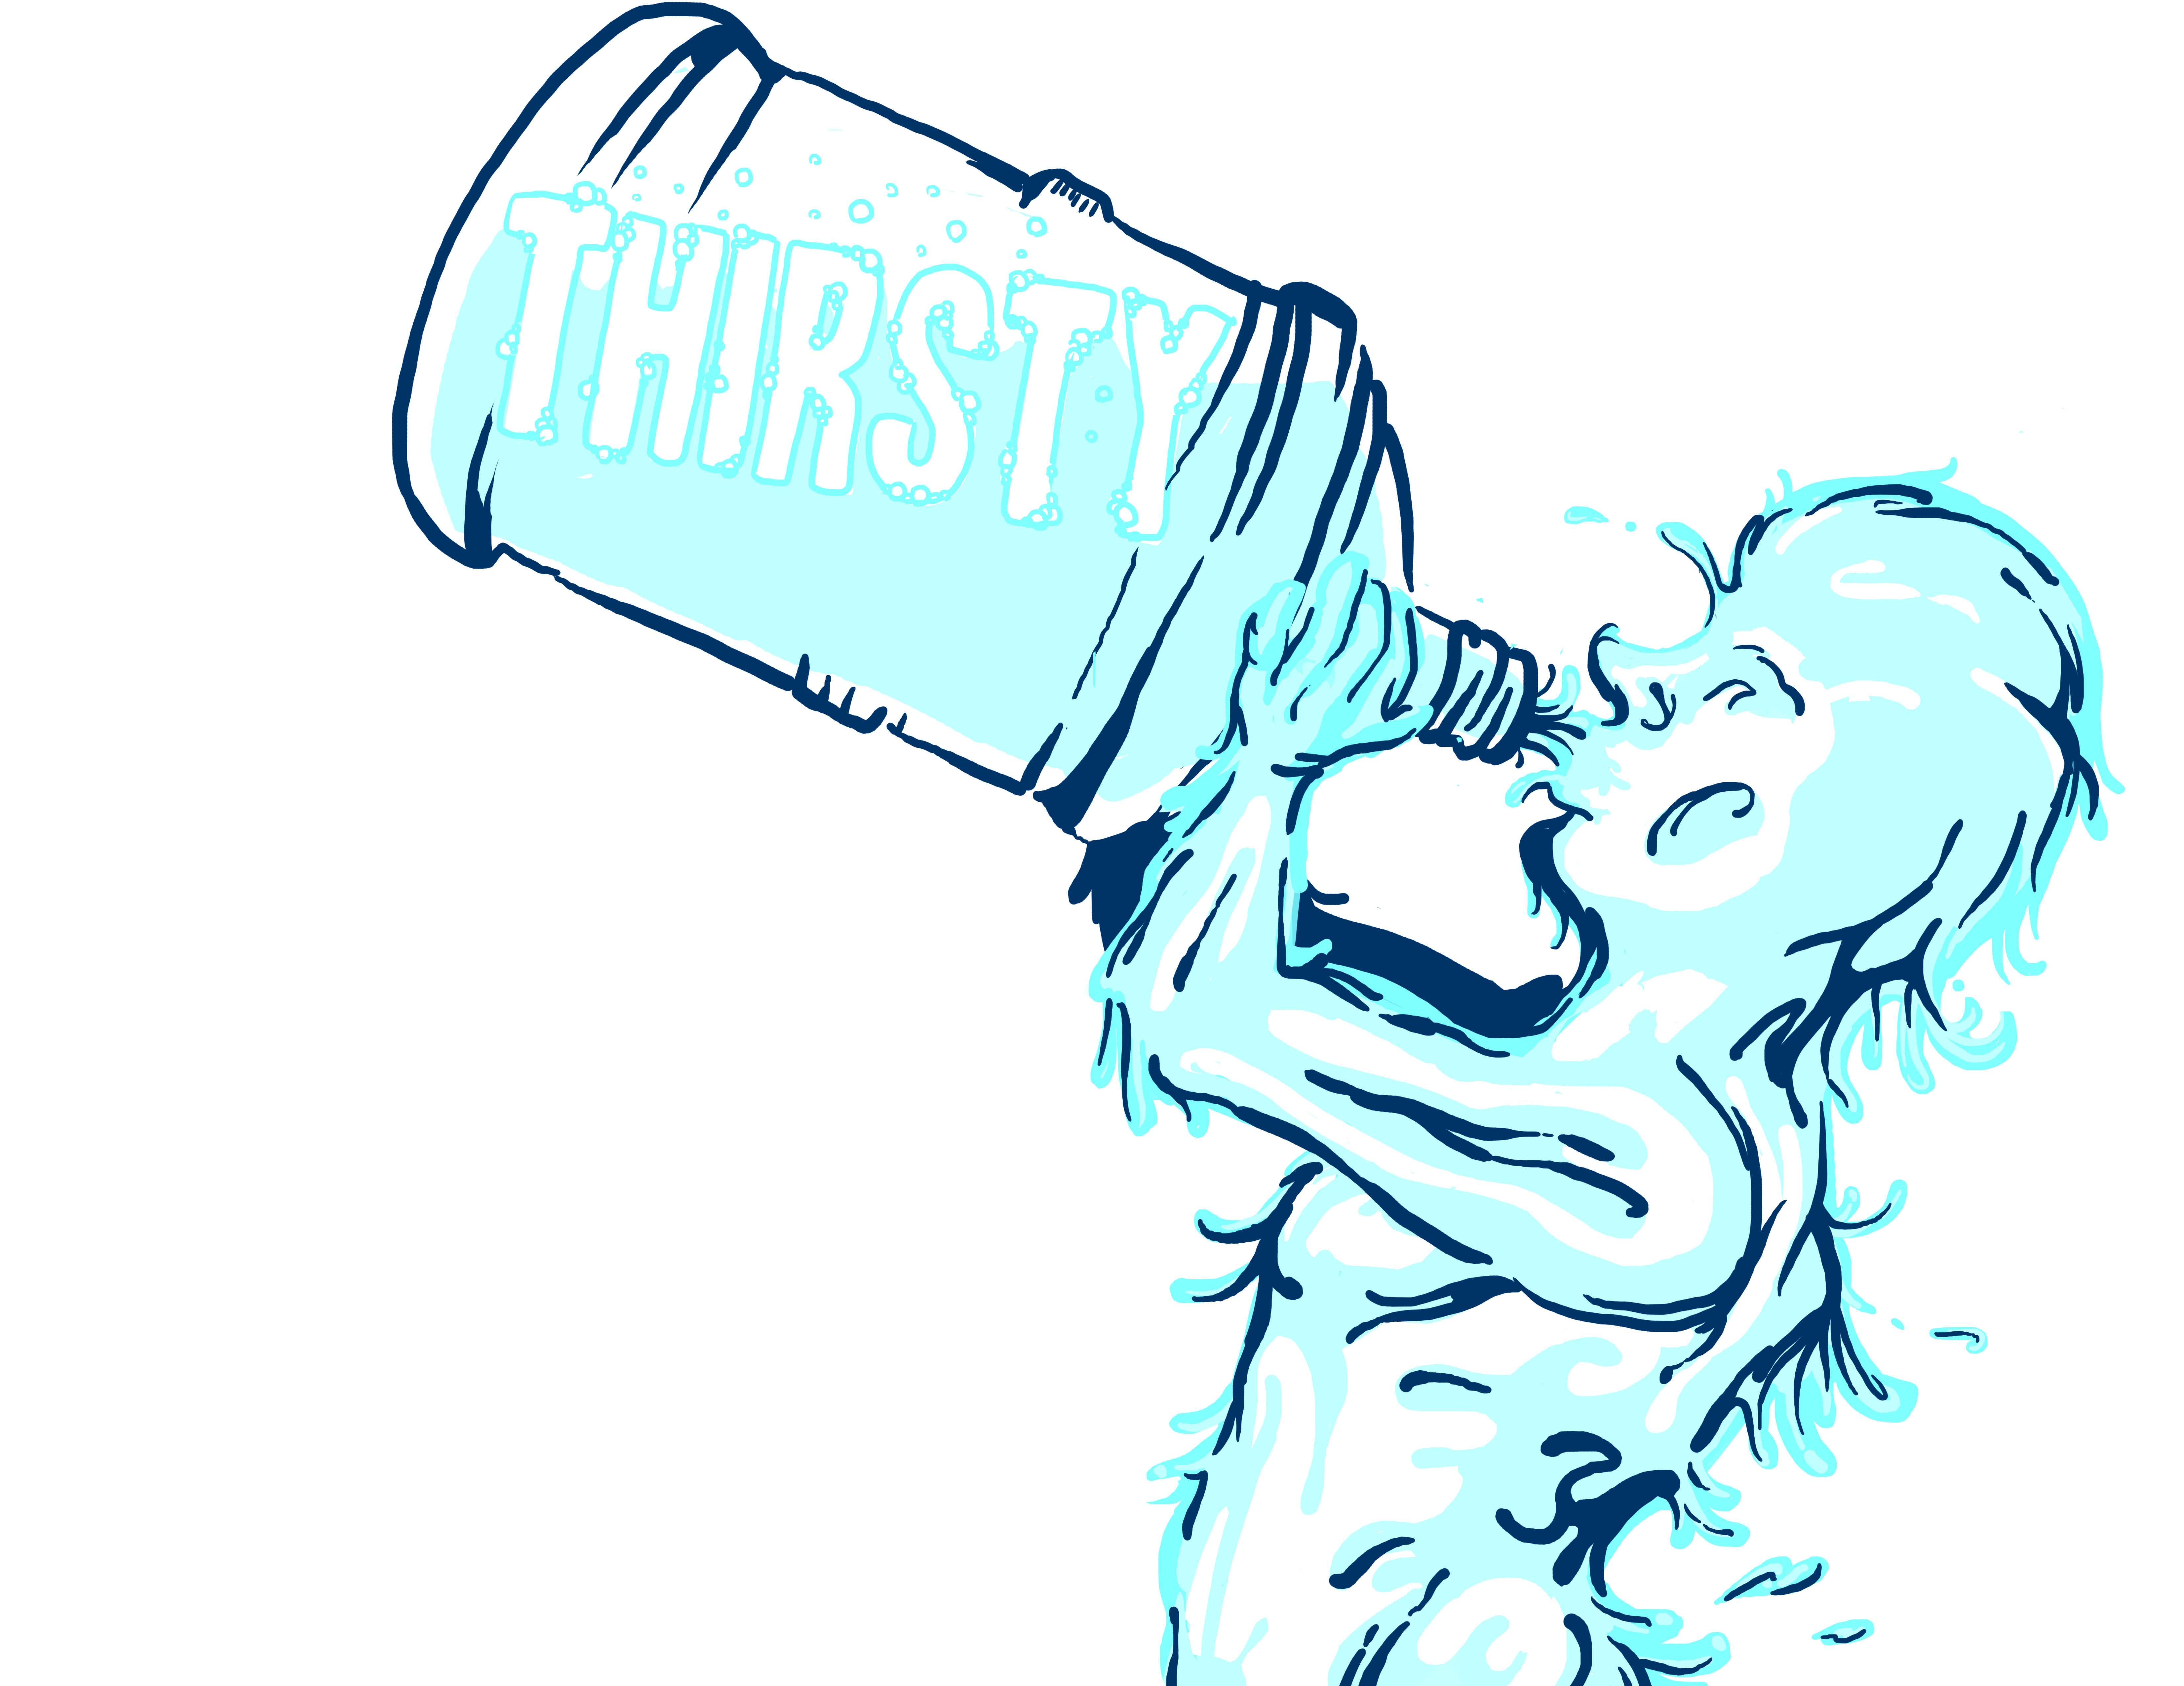 Thirsty  First Person Account Of The Real Risks Of Overhydration And